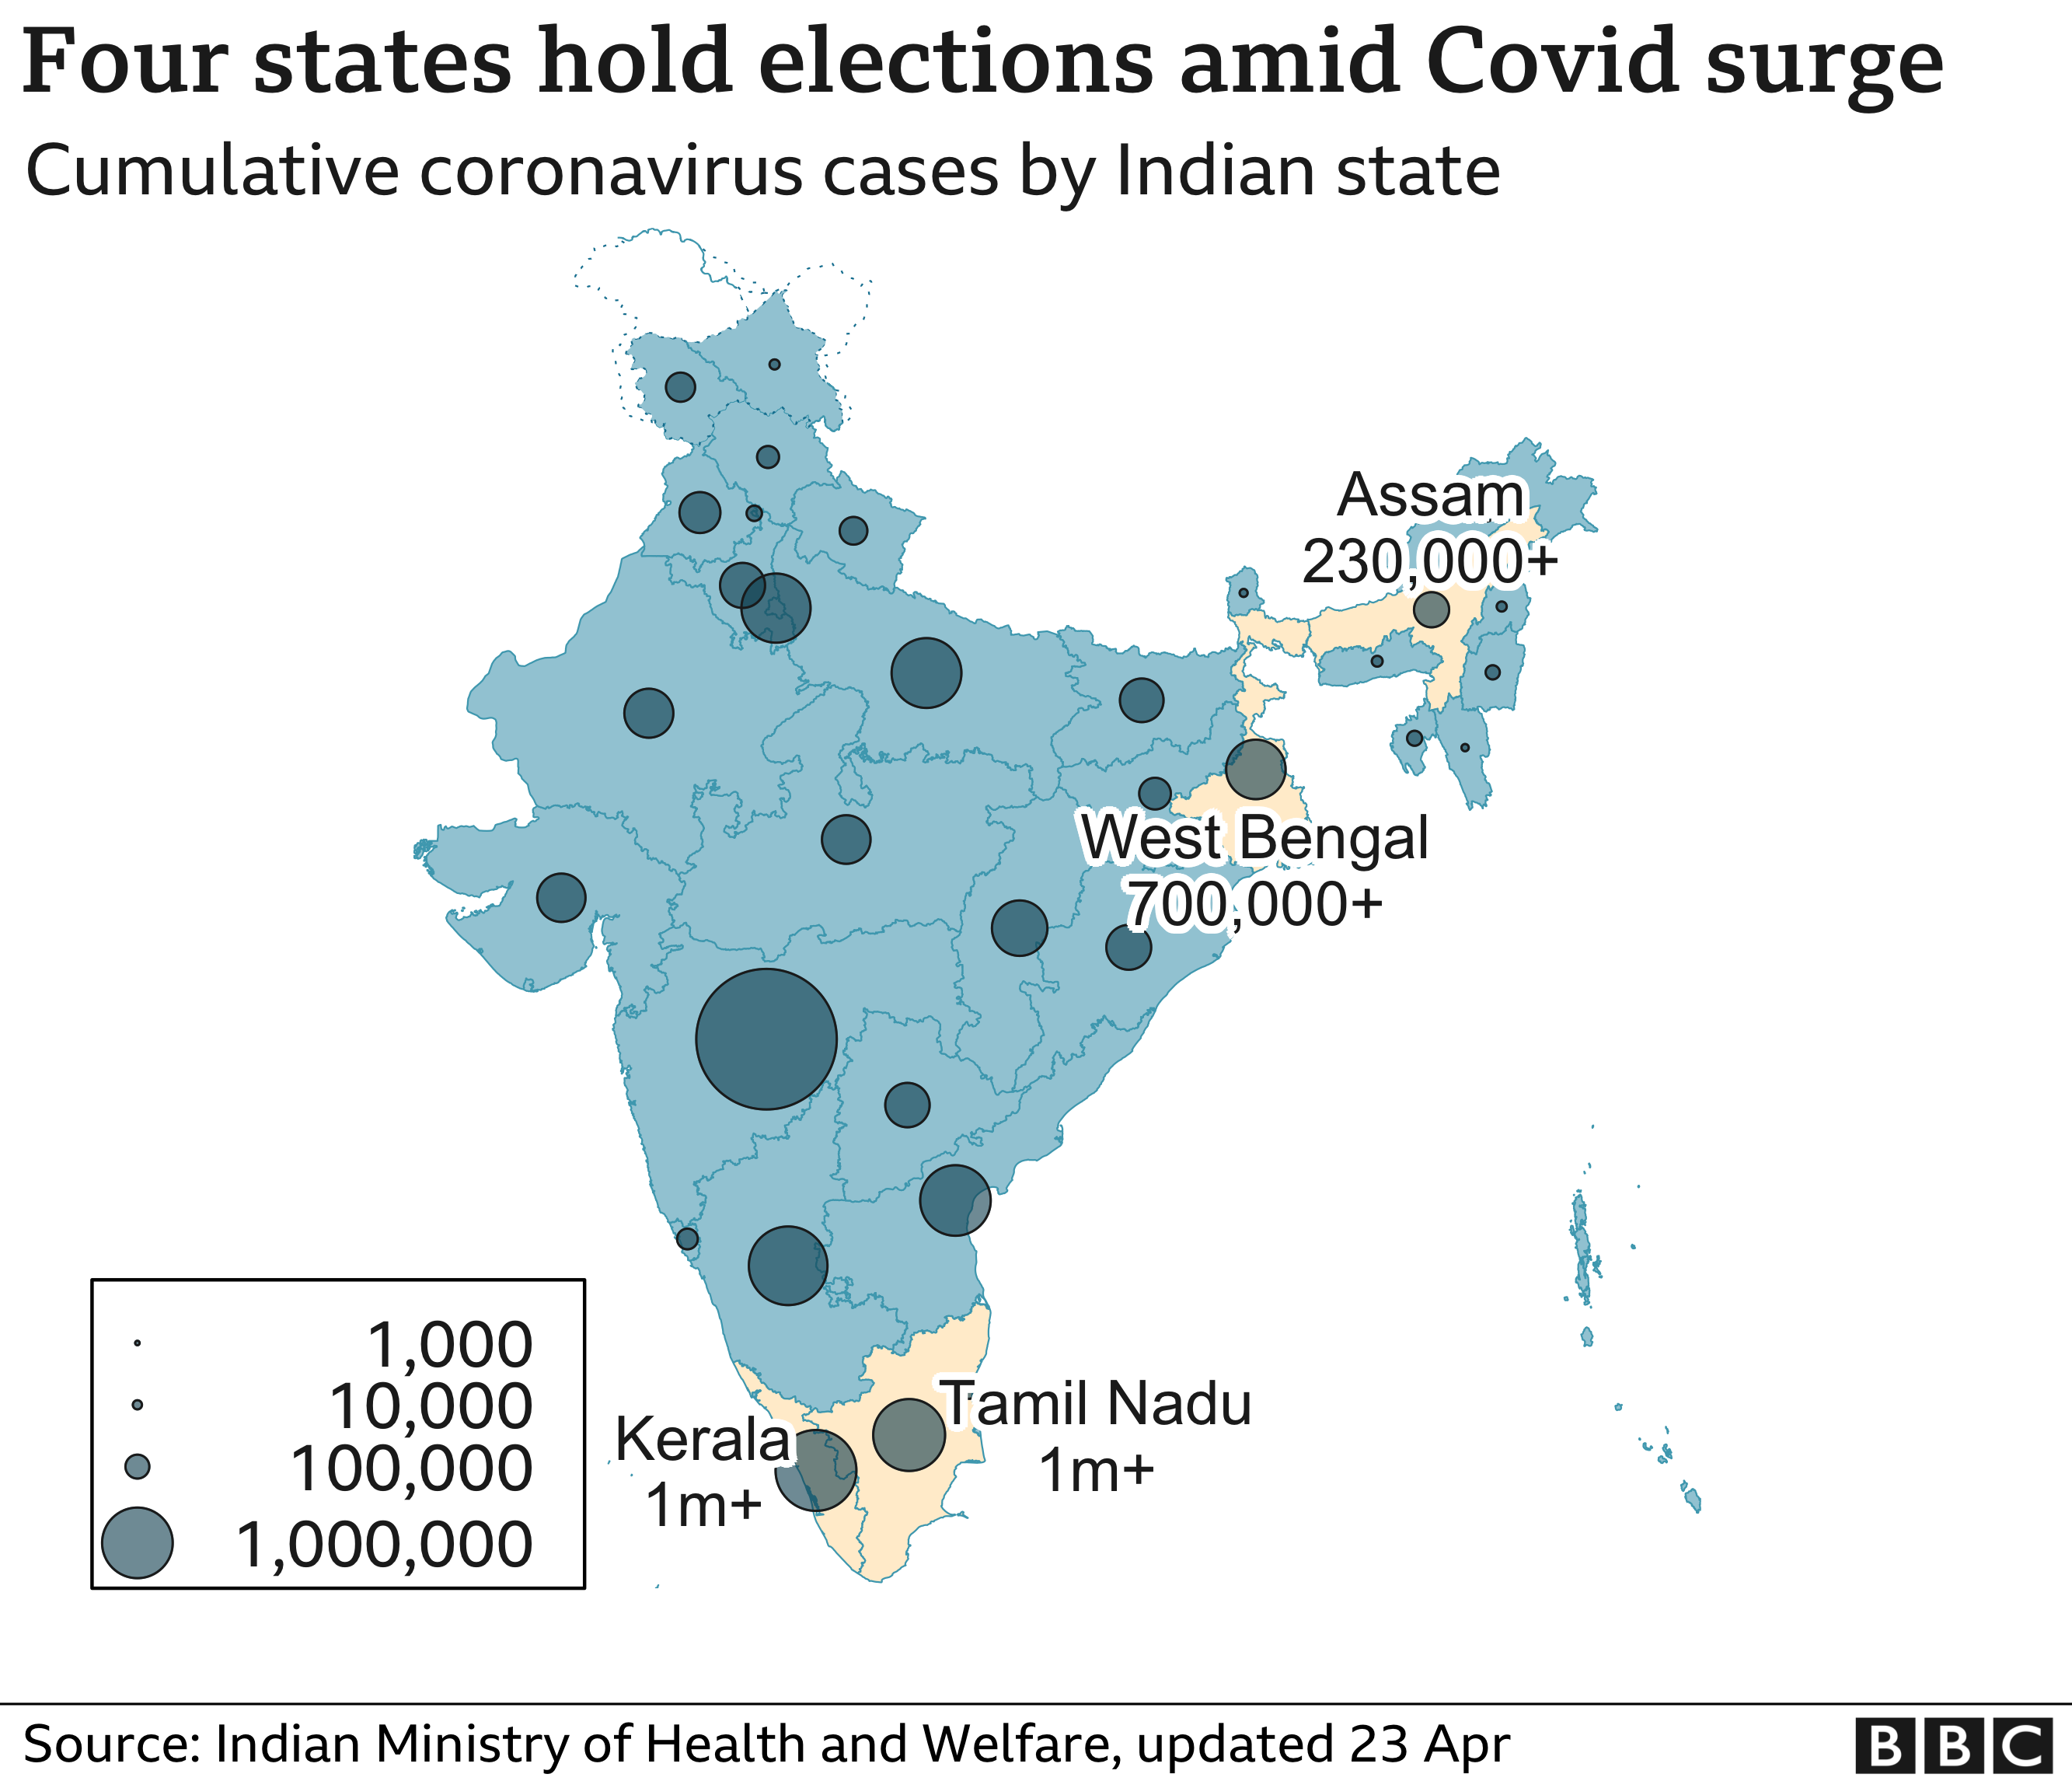 Map of case numbers in India showing election states